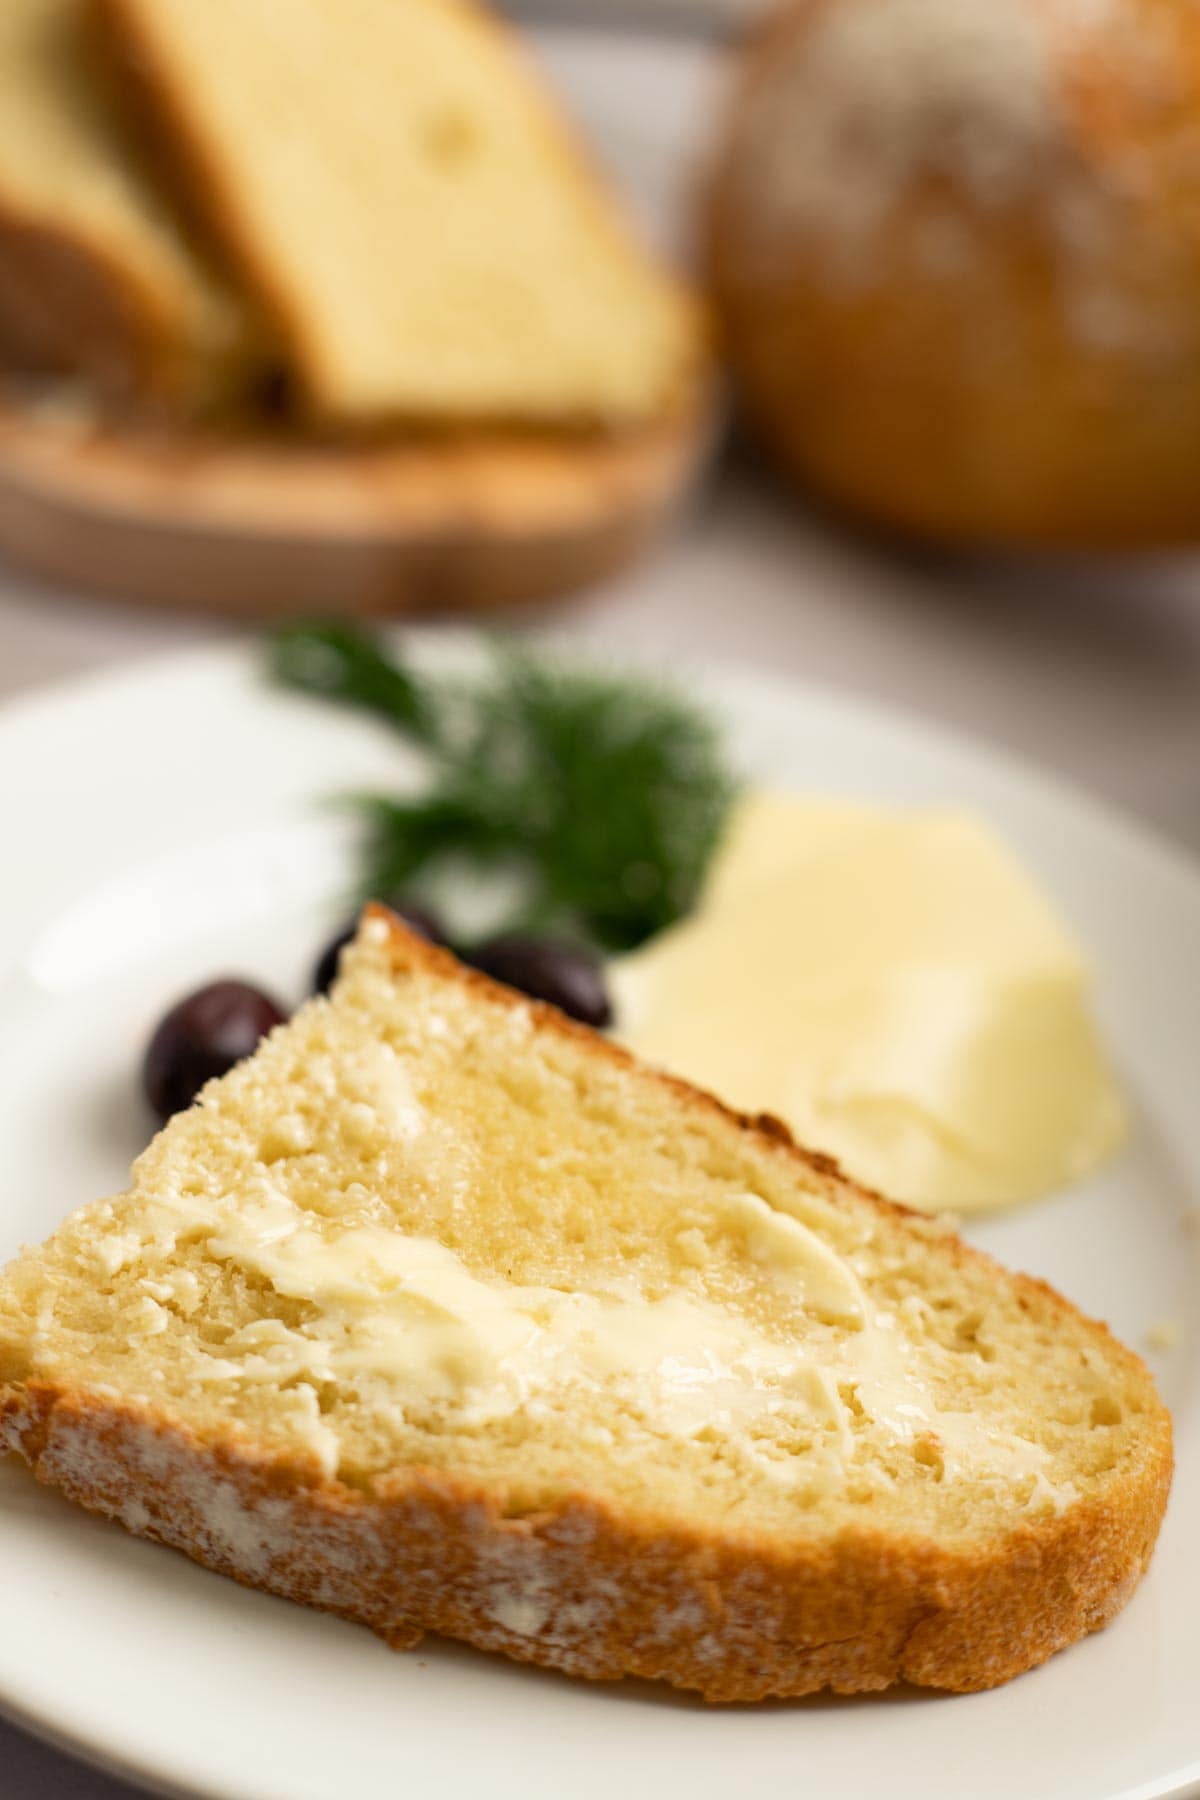 Slice of semolina bread with butter on a white plate with olives and butter.